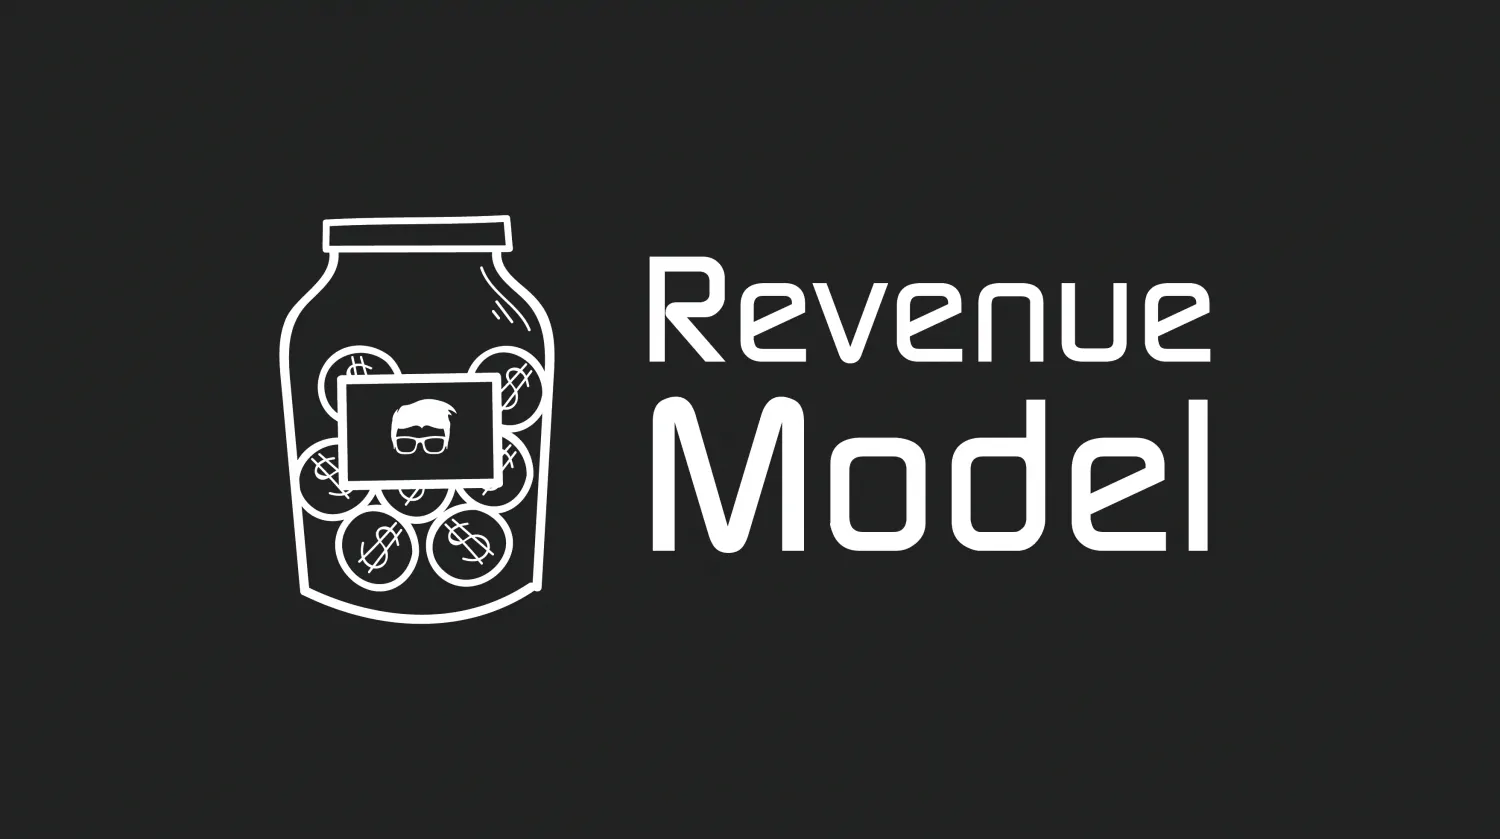 What Is A Revenue Model? - Components & Types